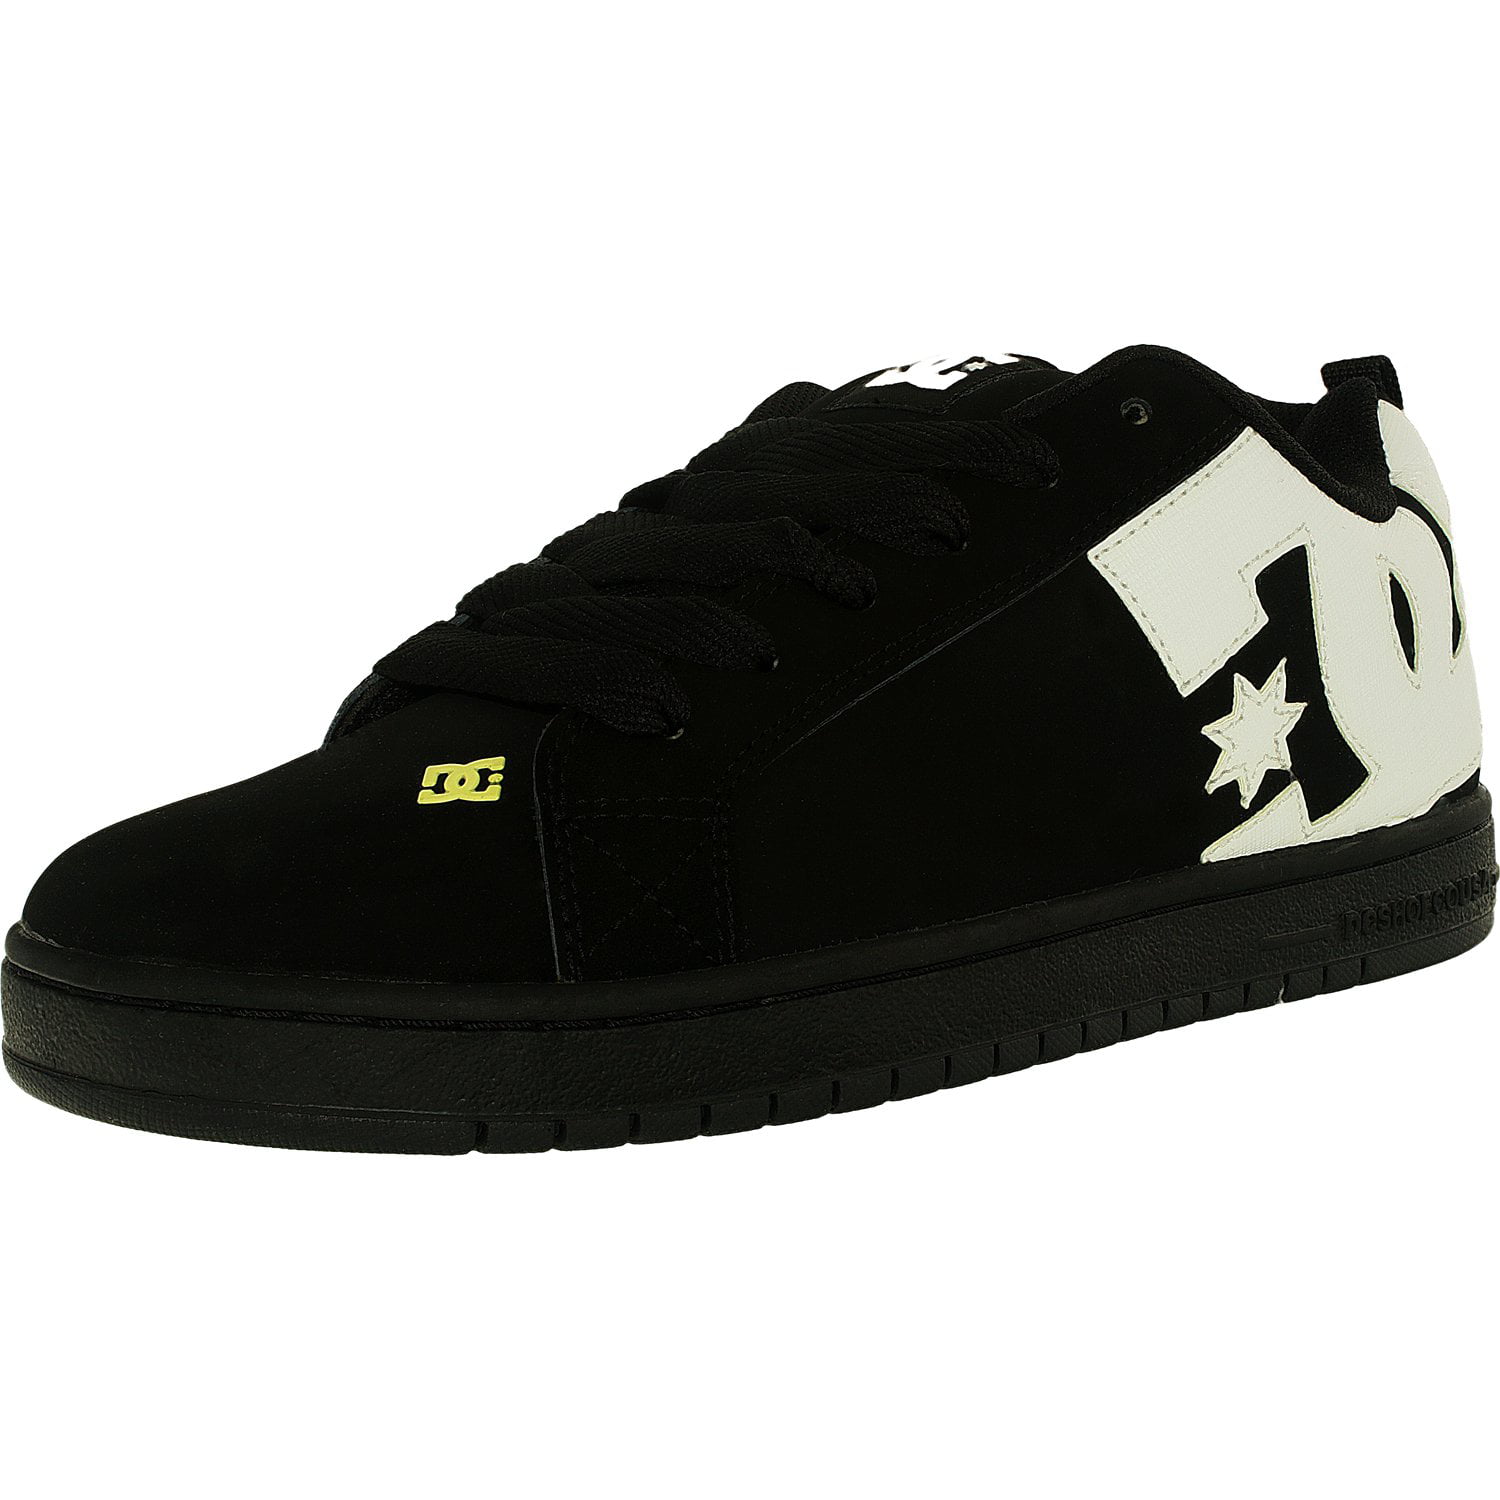 dc high ankle shoes